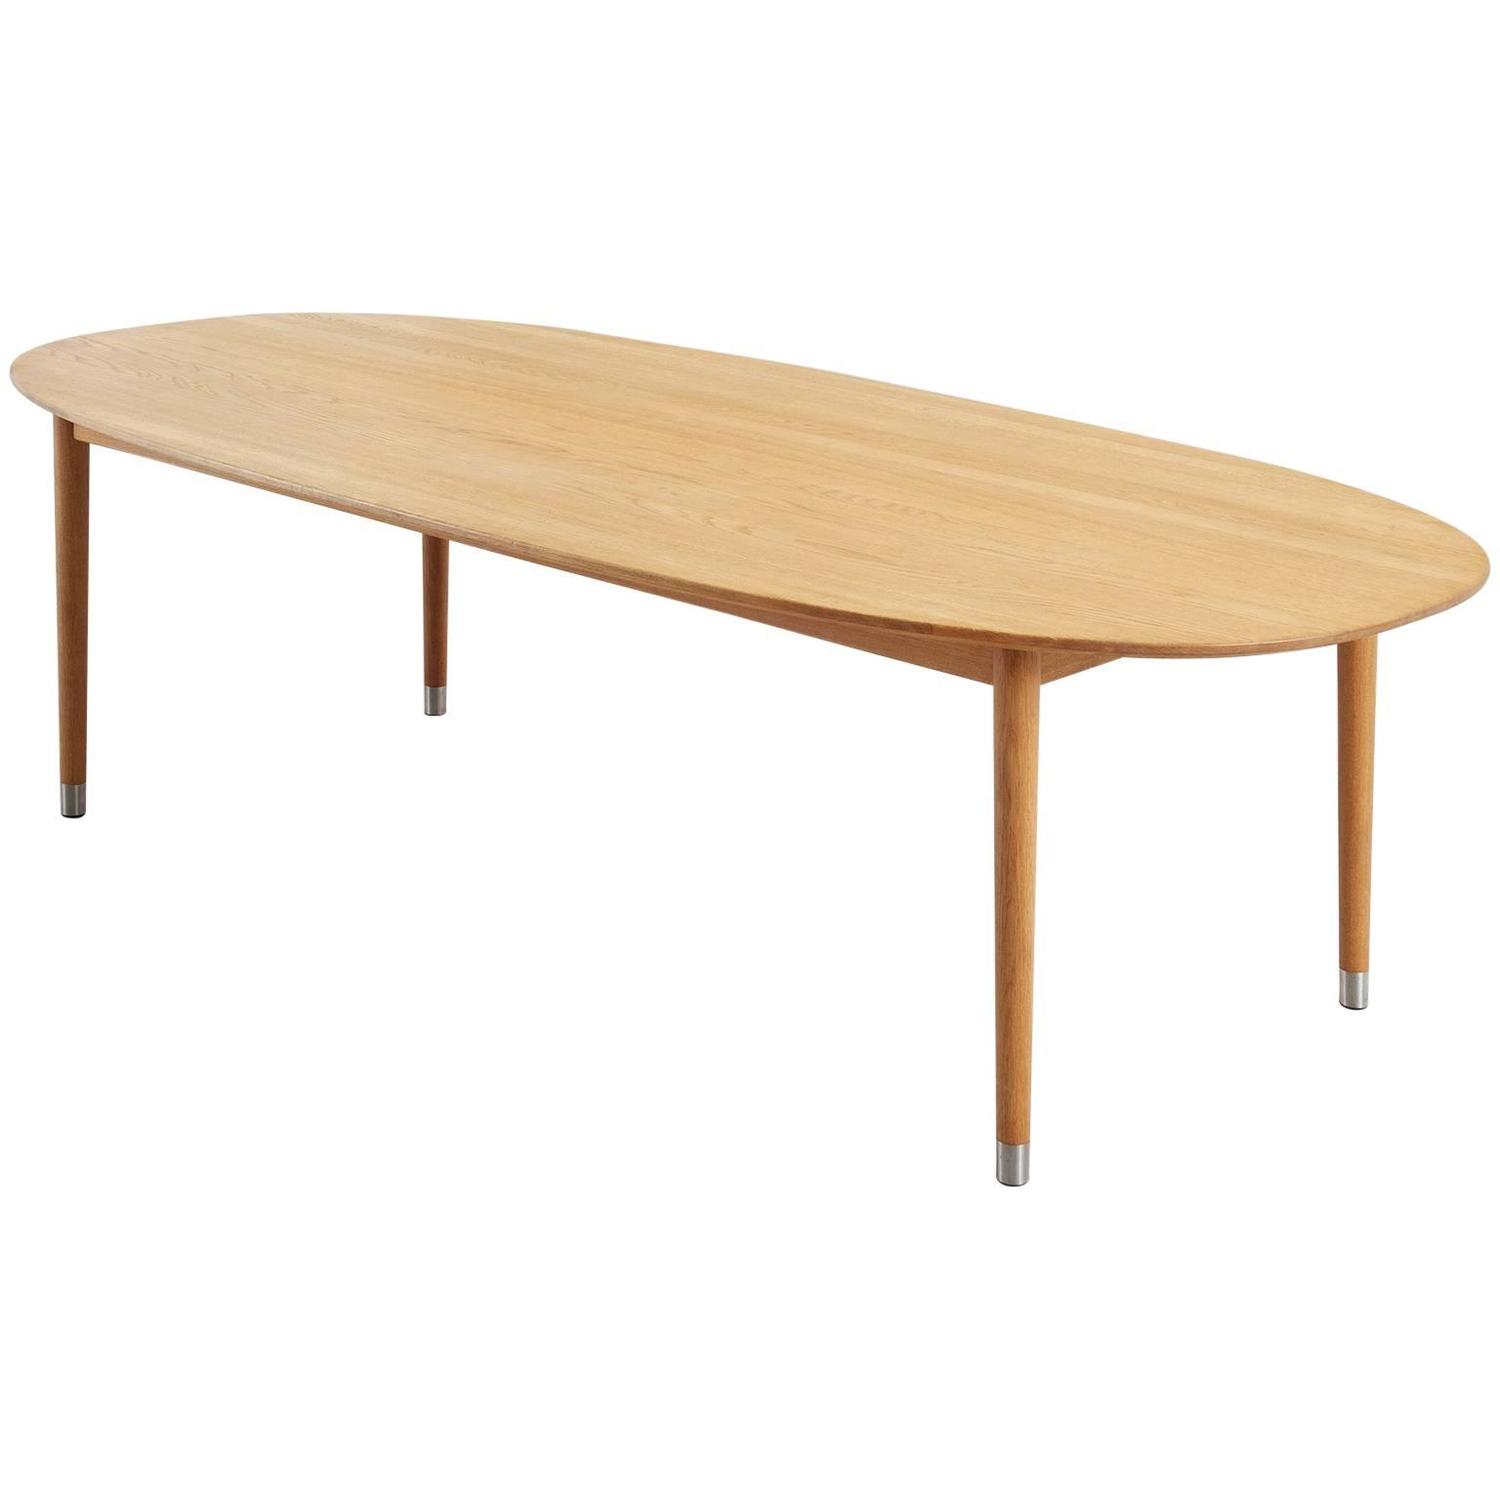 Large Oval Dining Table in Blond Oak For Sale at 1stdibs